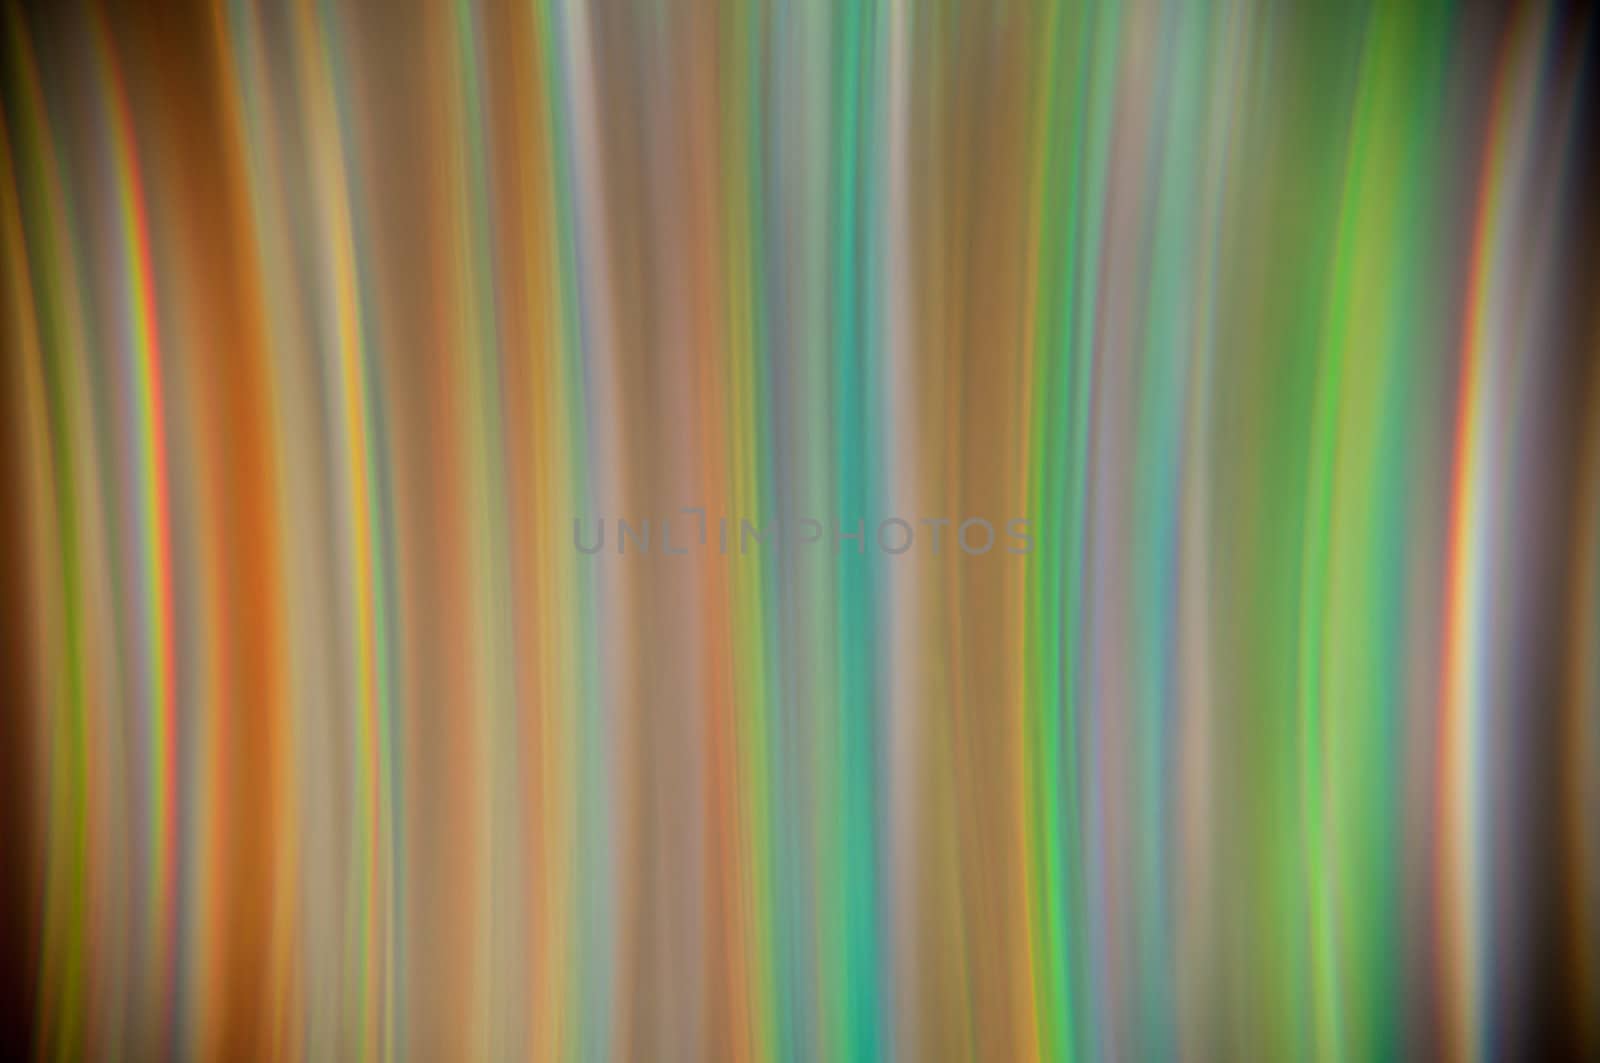 Background, a rainbow of colored vertical colored stripes.
